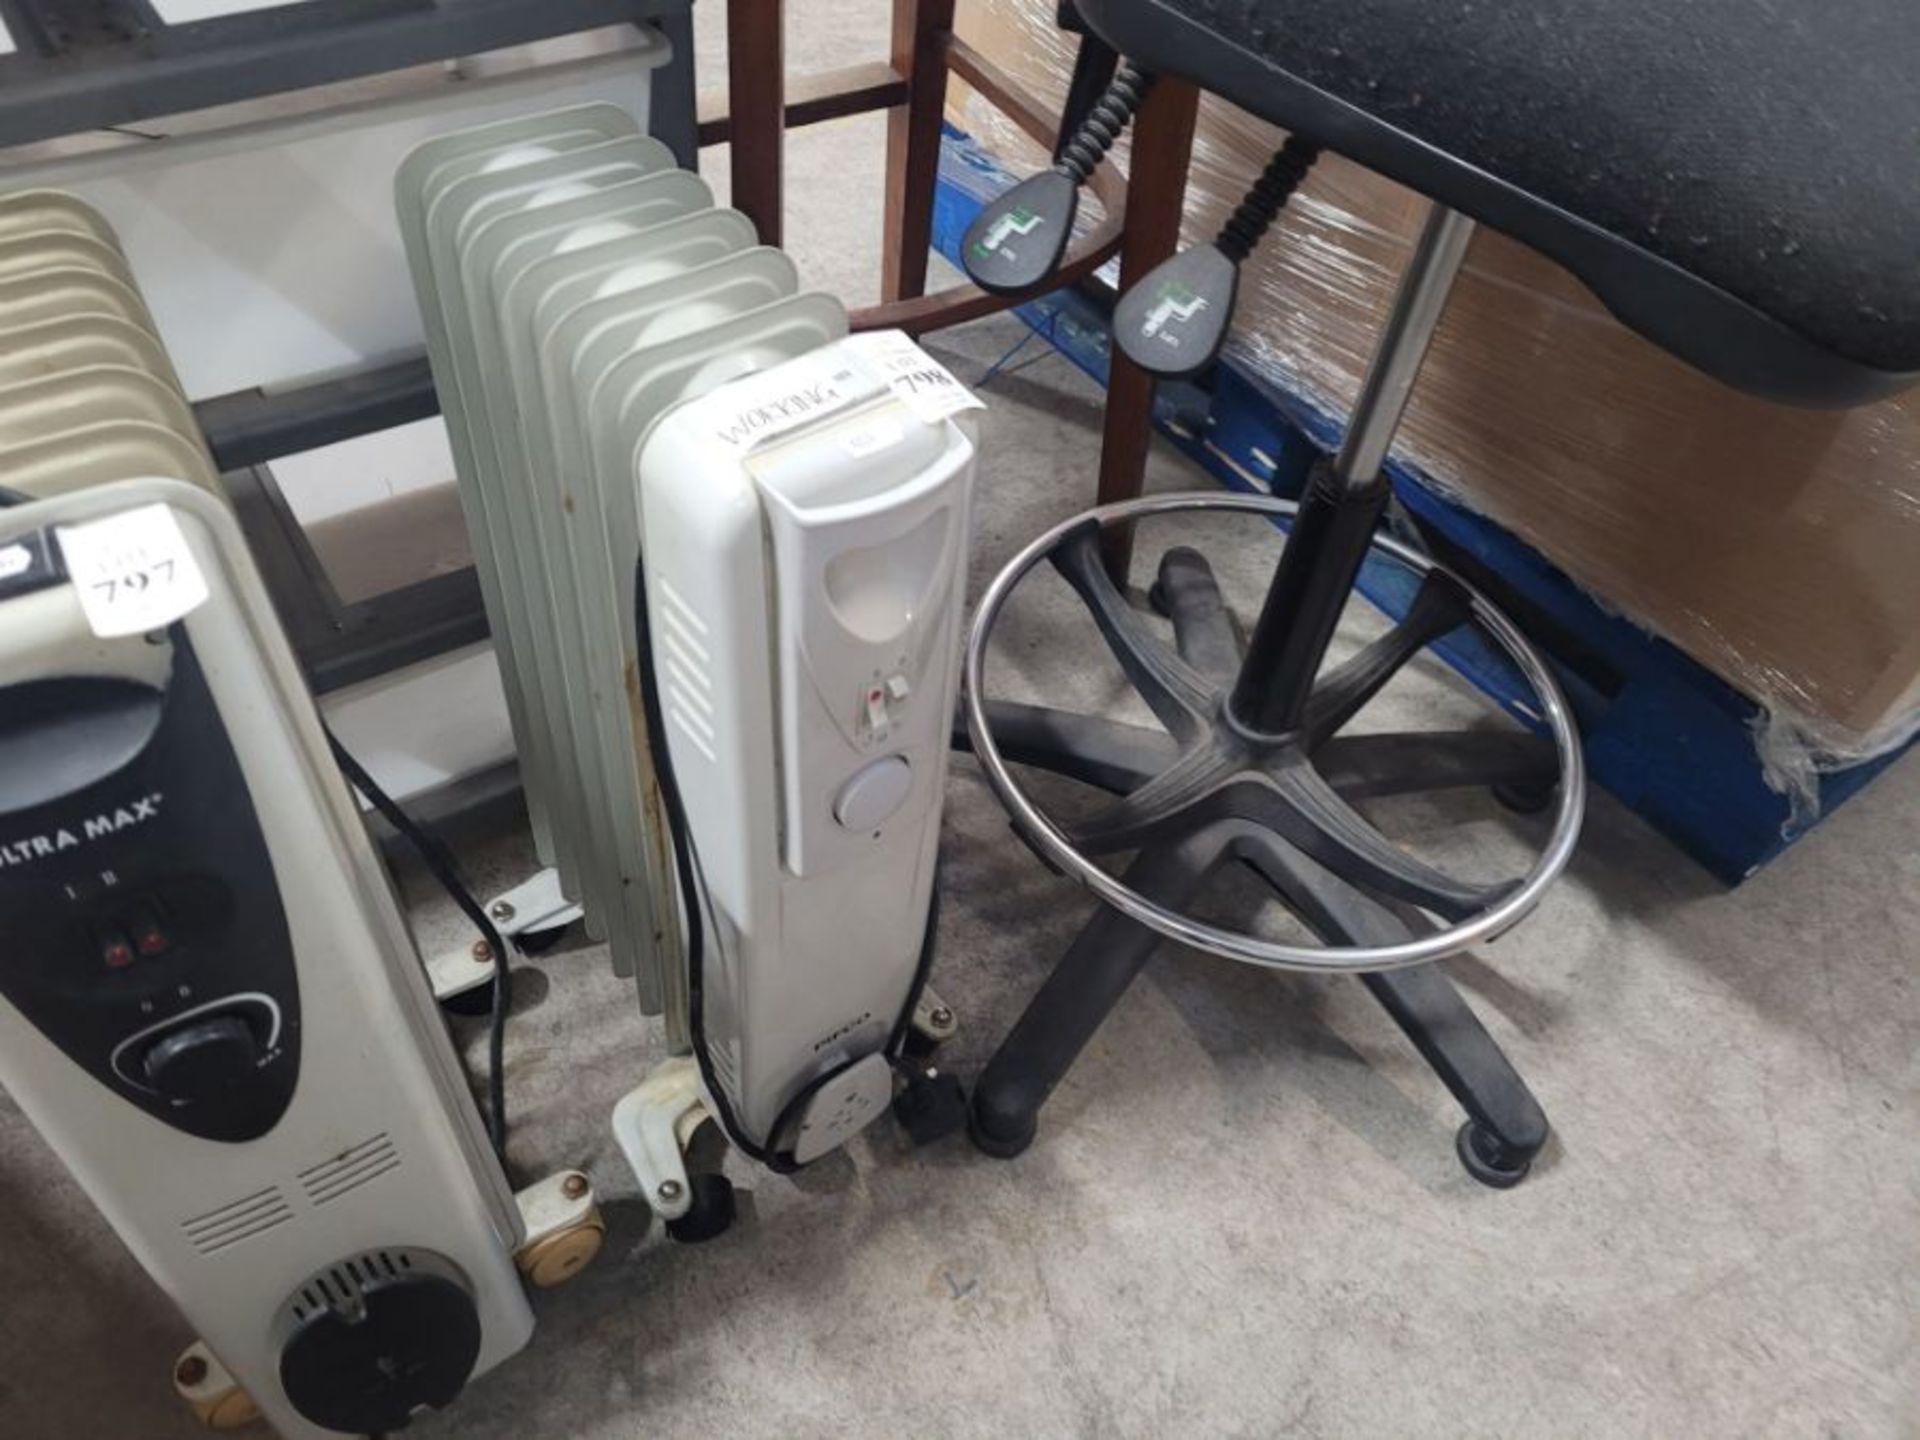 OIL FILLED PIFCO RADIATOR (WORKING)